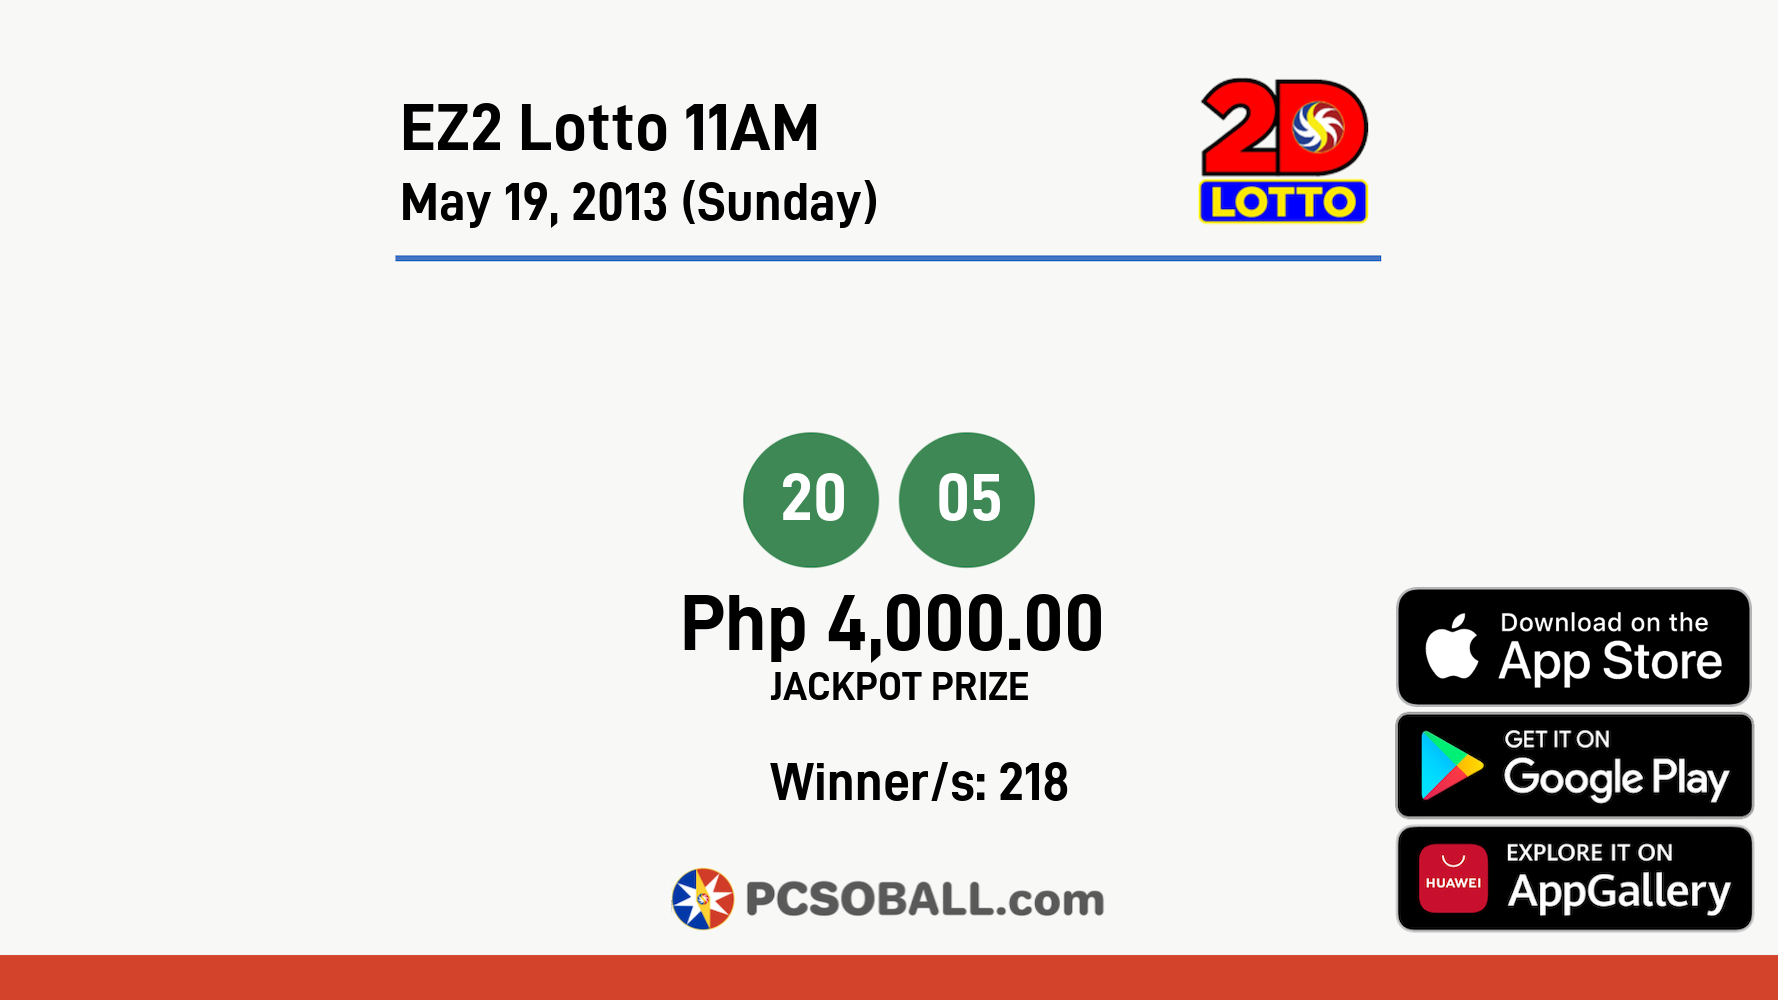 EZ2 Lotto 11AM May 19, 2013 (Sunday) Result